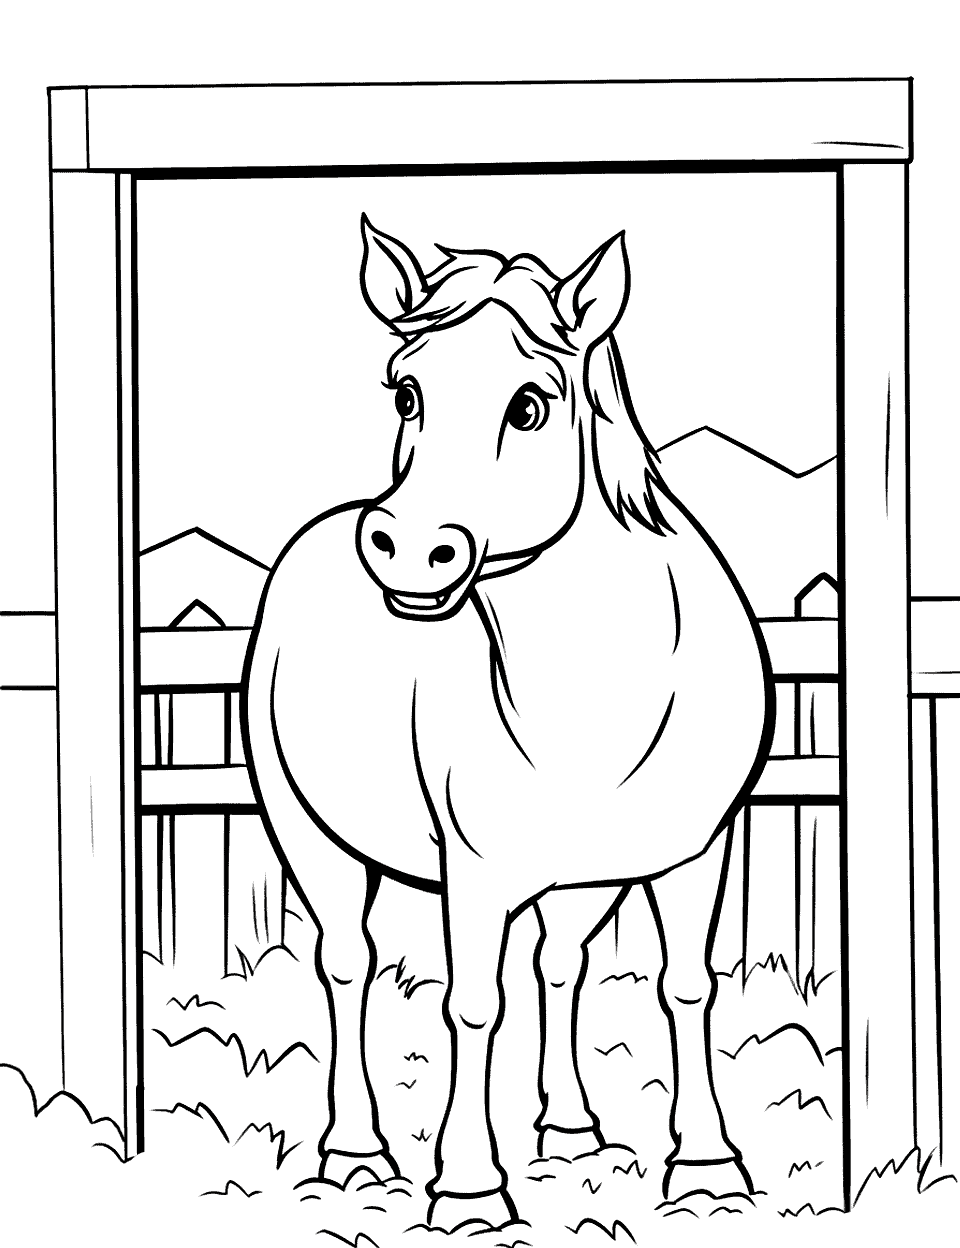 Horse in the Stable Farm Coloring Page - A horse peeking out from a stable door.